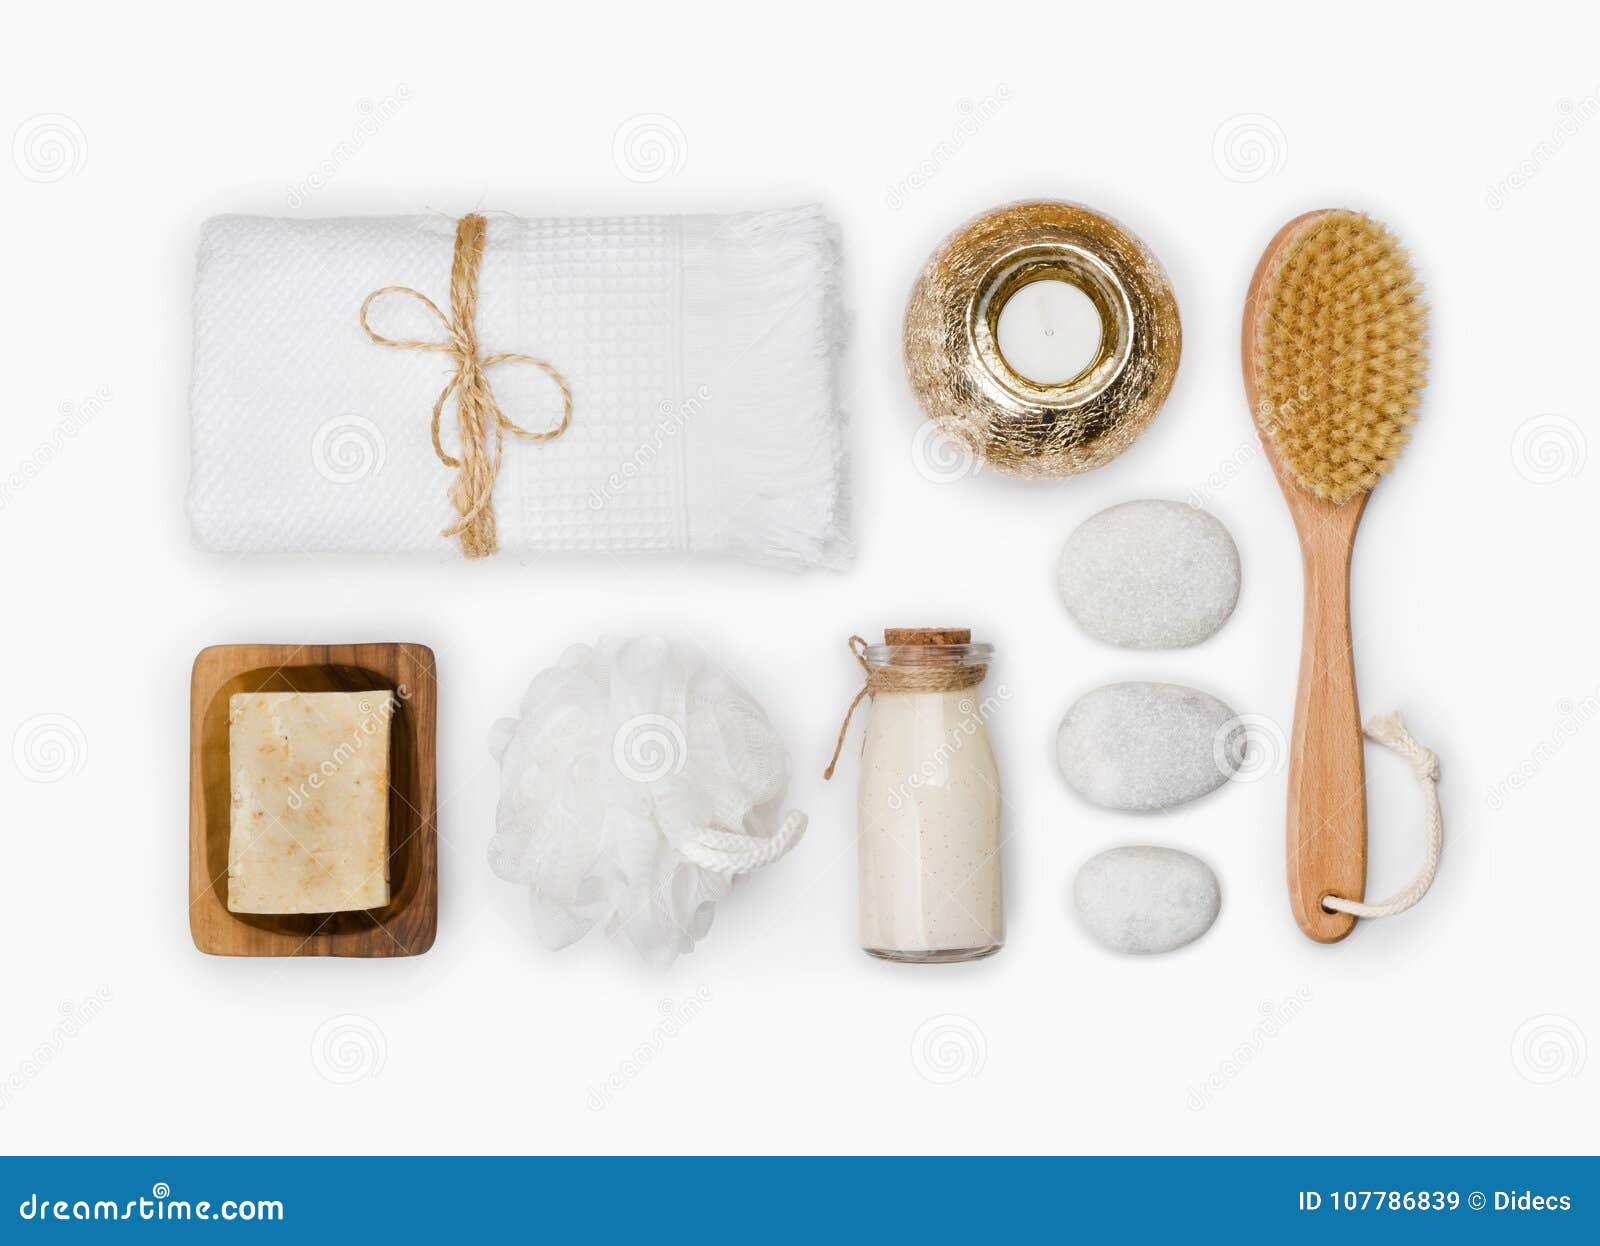 various wellness and spa threatment products  on white background